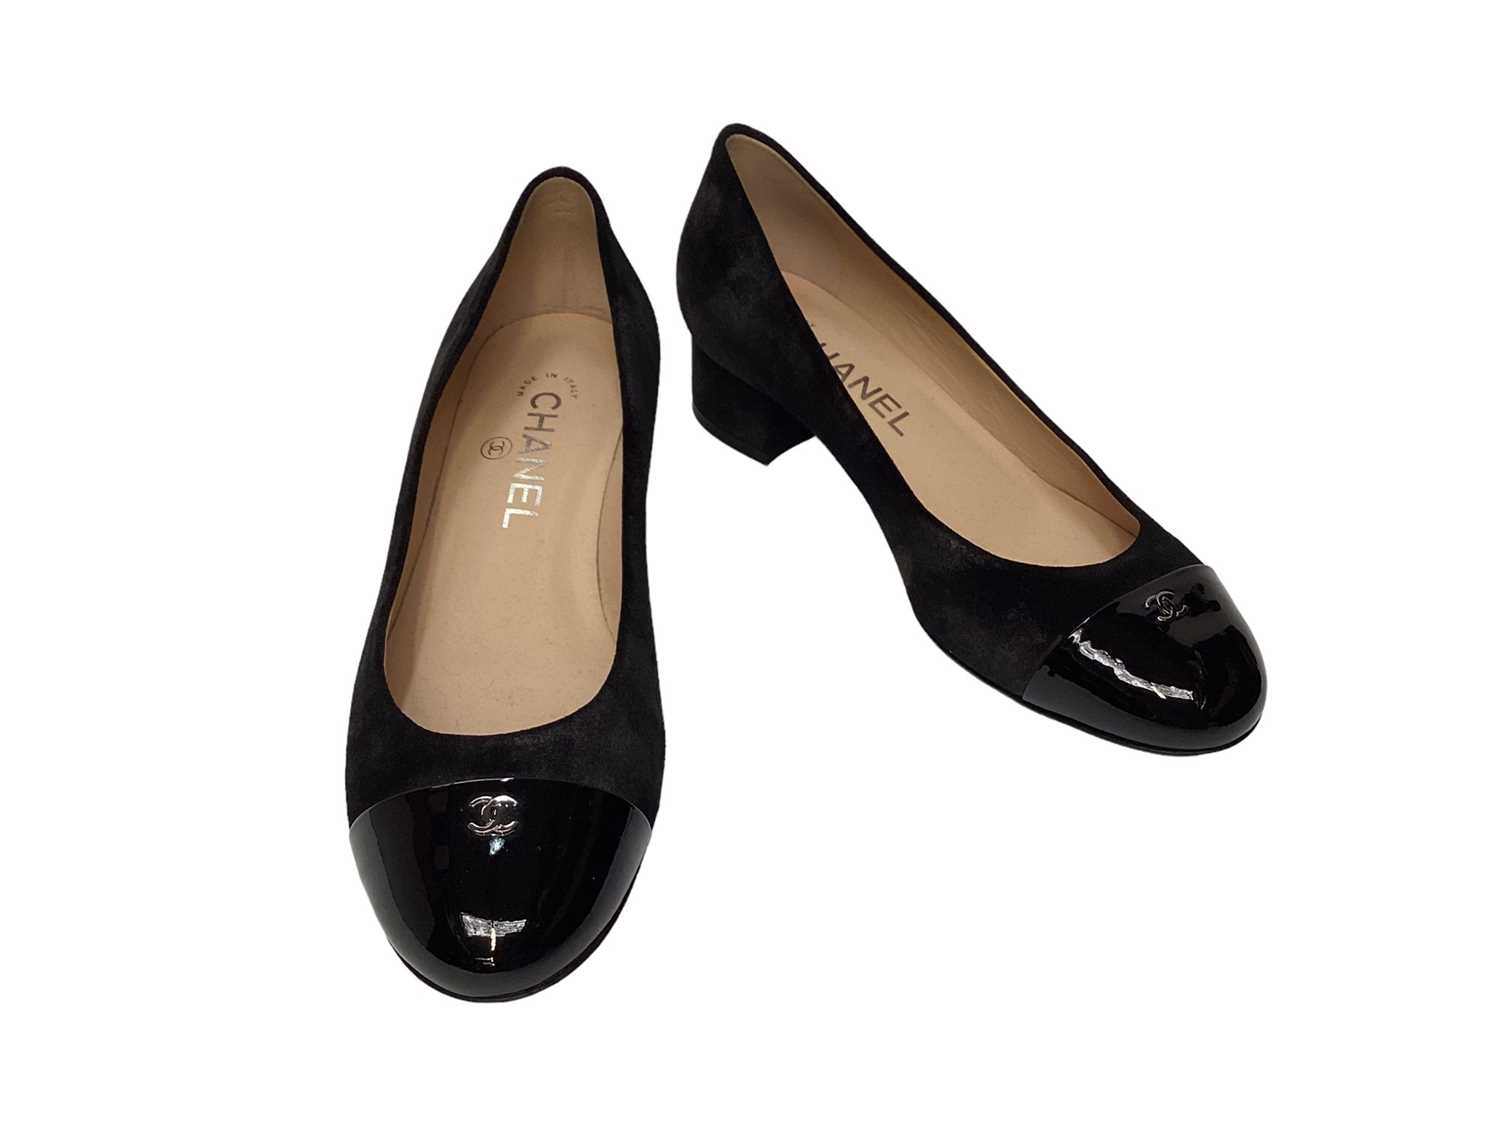 Lot 2080 - Chanel shoes in black velvet with gold